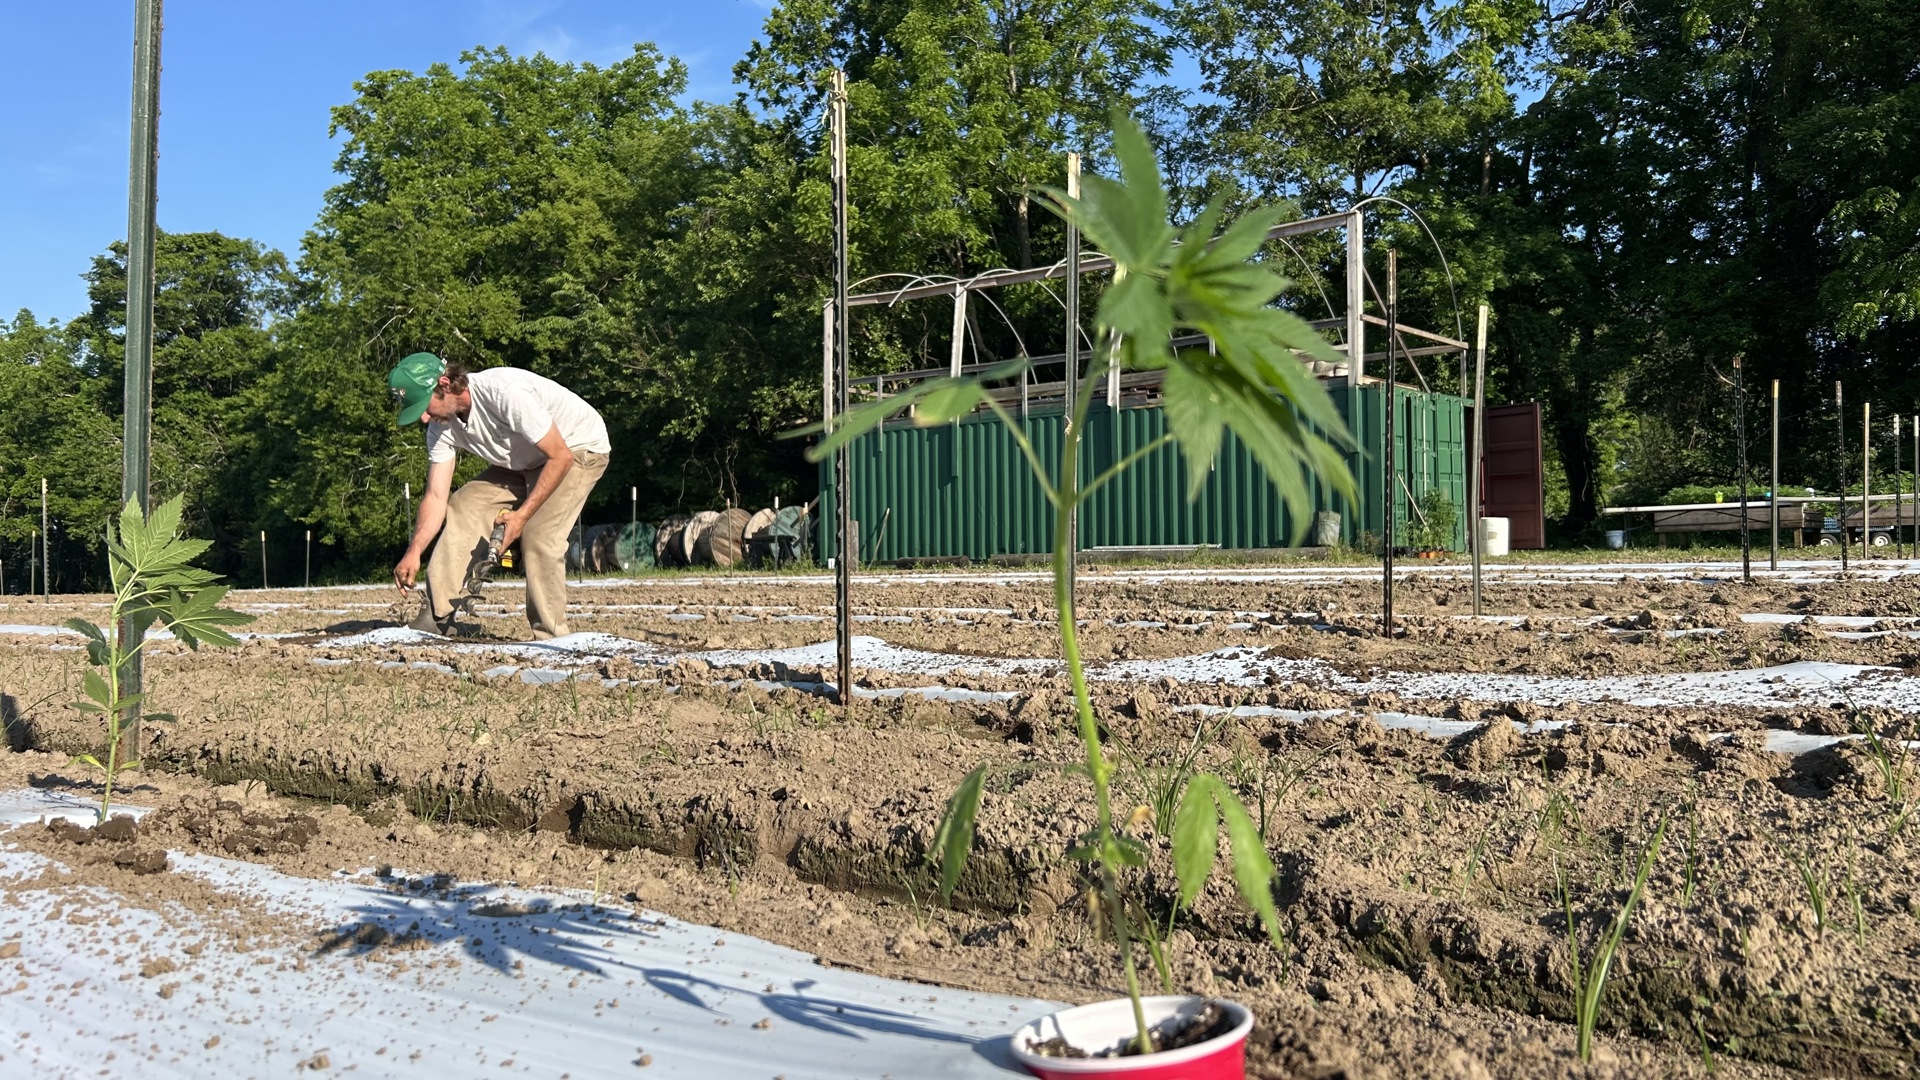 We spent months talking to farmers and following the growth process of the plant, a year after Virginia laws changed the kinds of hemp products available on shelves.